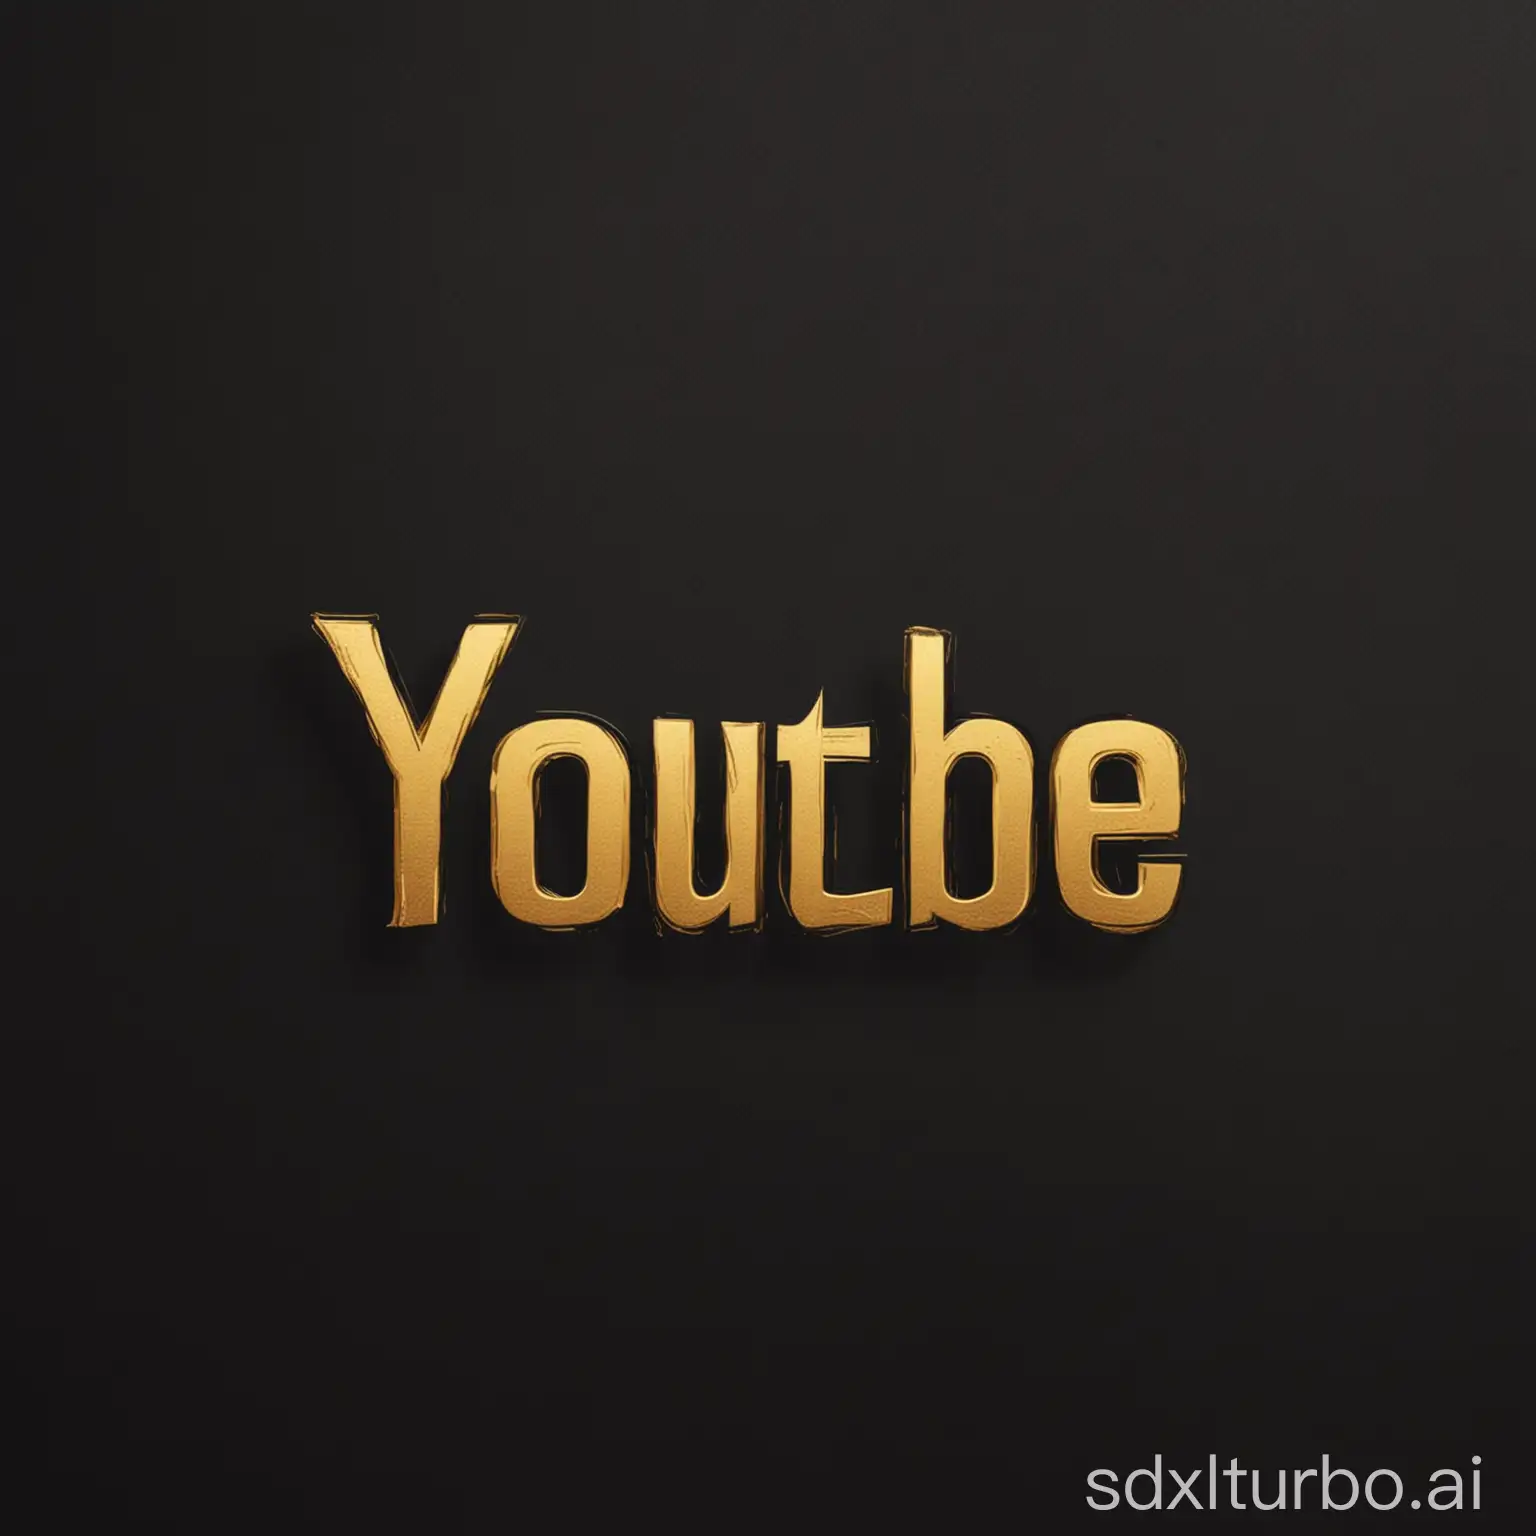 Create a logo a YouTube brand that deals with practical adult education. The colours included are black and gold. It should be simple and engaging